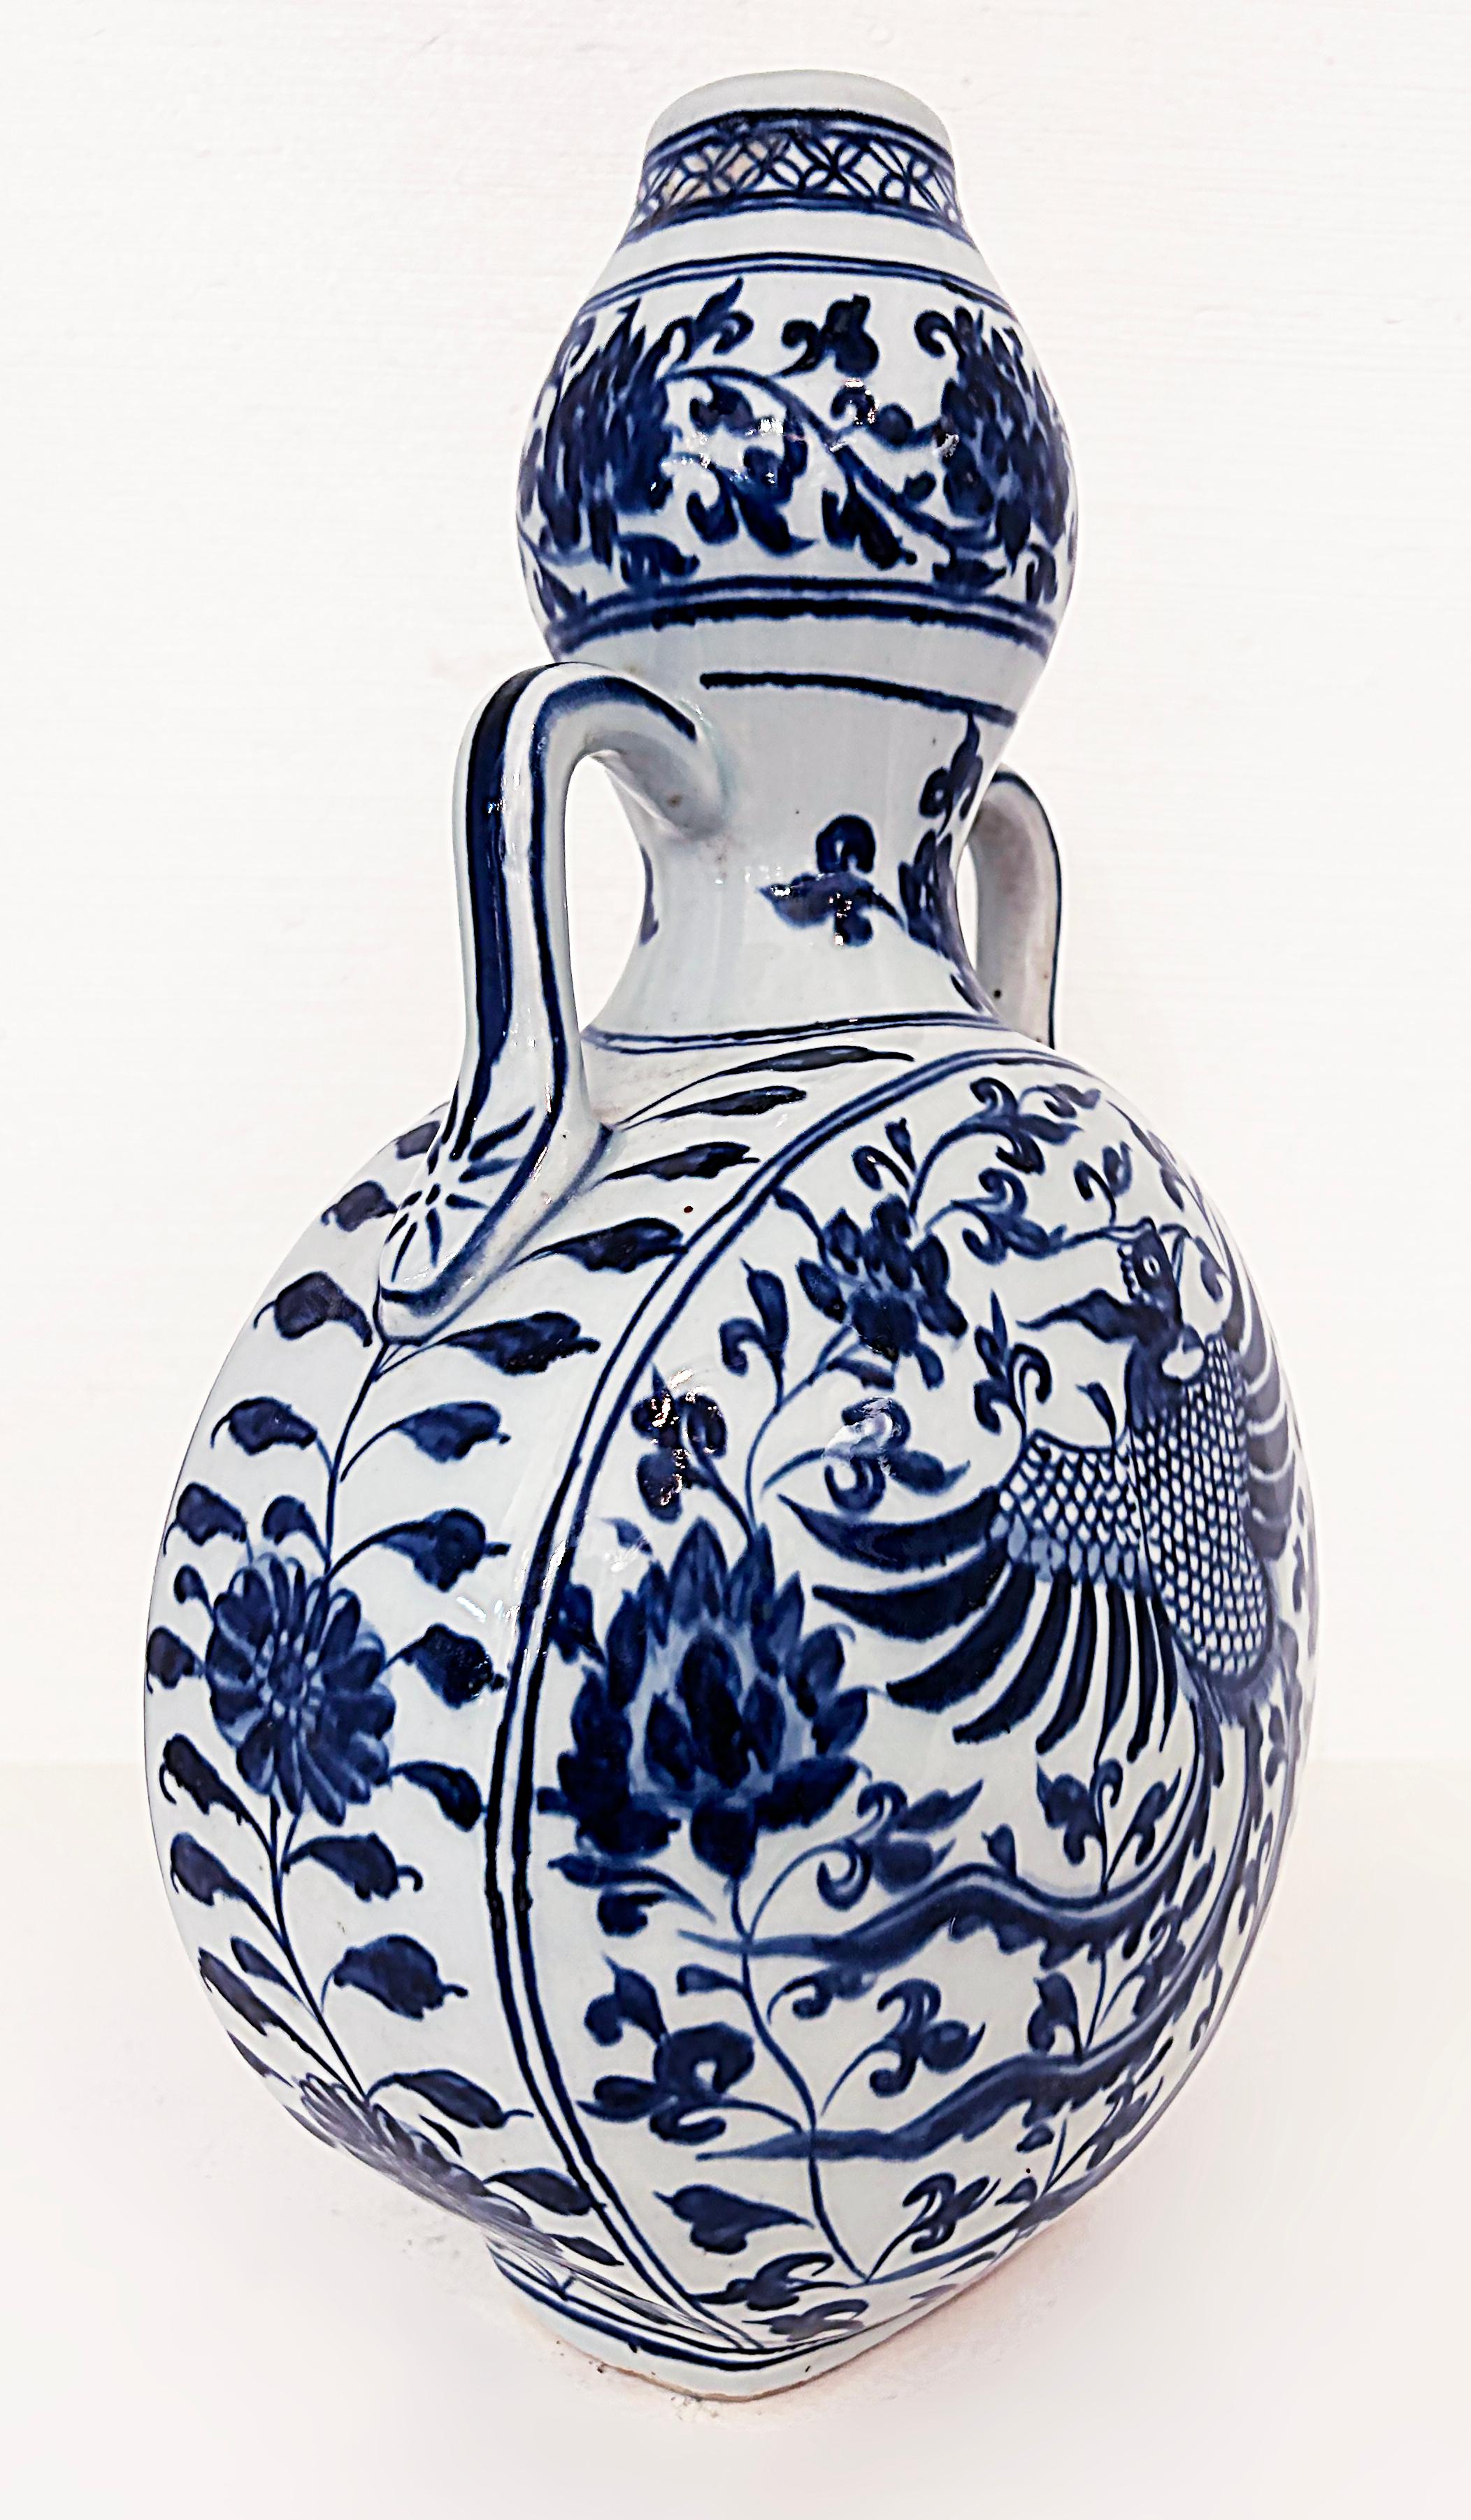 Chinese Blue and White Porcelain Phoenix Bird Vase with Handles

Offered for sale is a Chinese blue and white porcelain vase with handles. The vase is decorated with a Phoenix bird and floral details. We are offering a large collection of Chinese